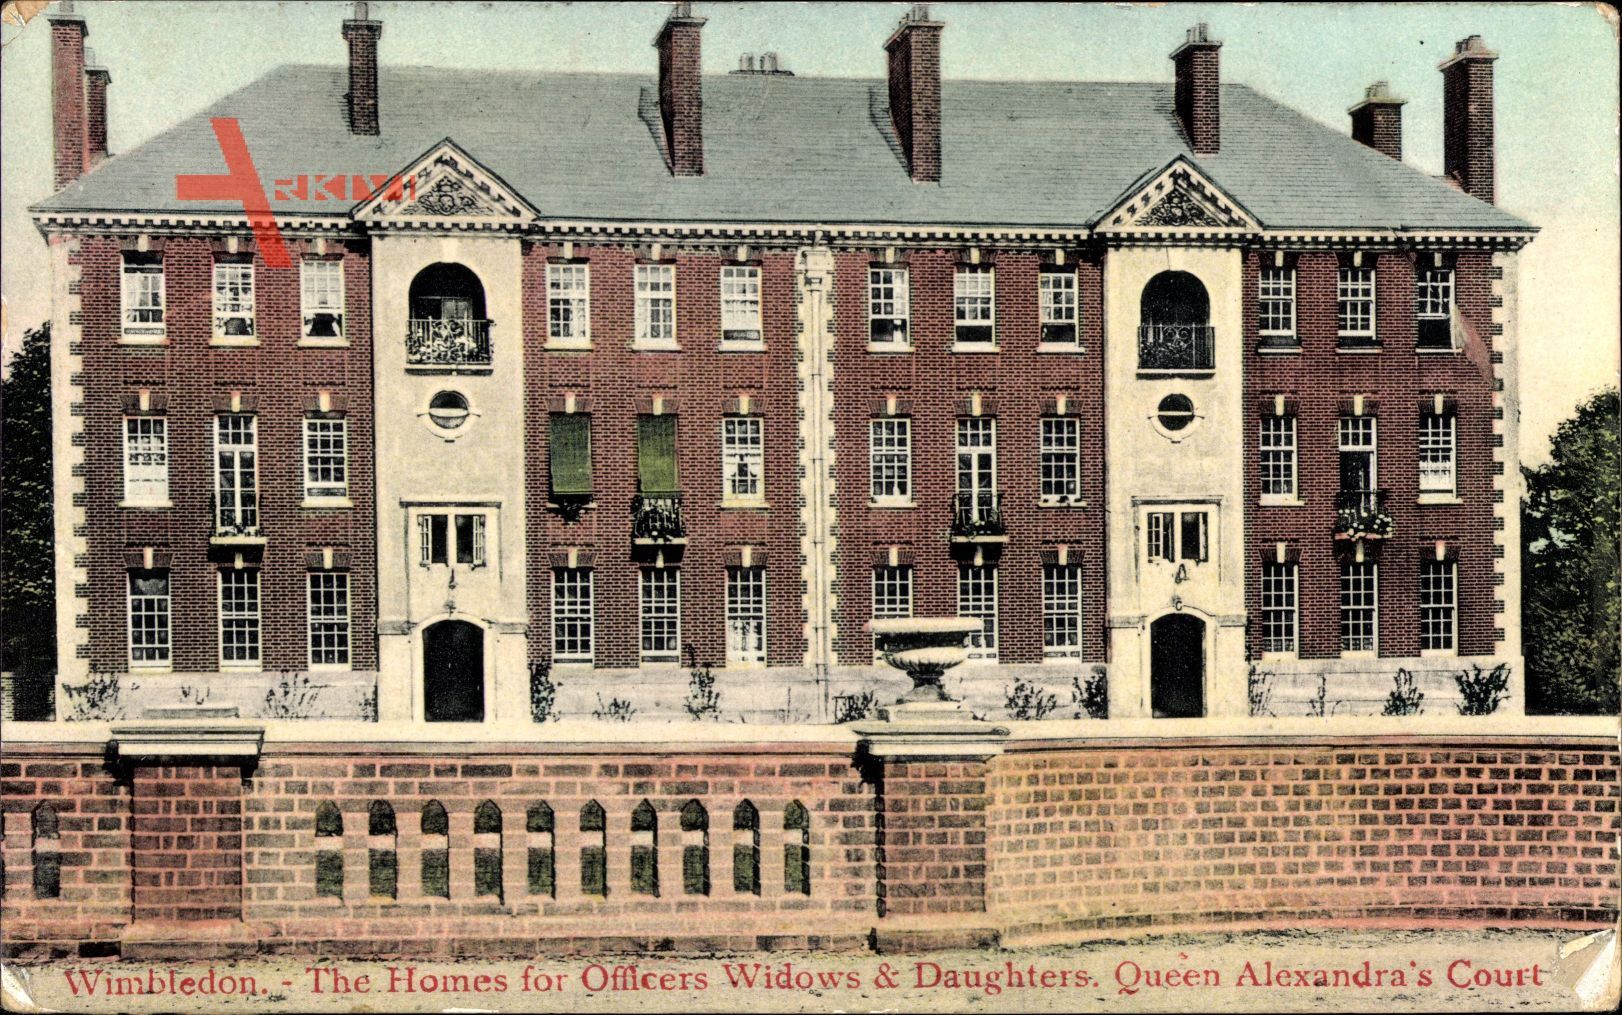 Wimbledon London, The Homes for Officers Widows and Daughters, Court